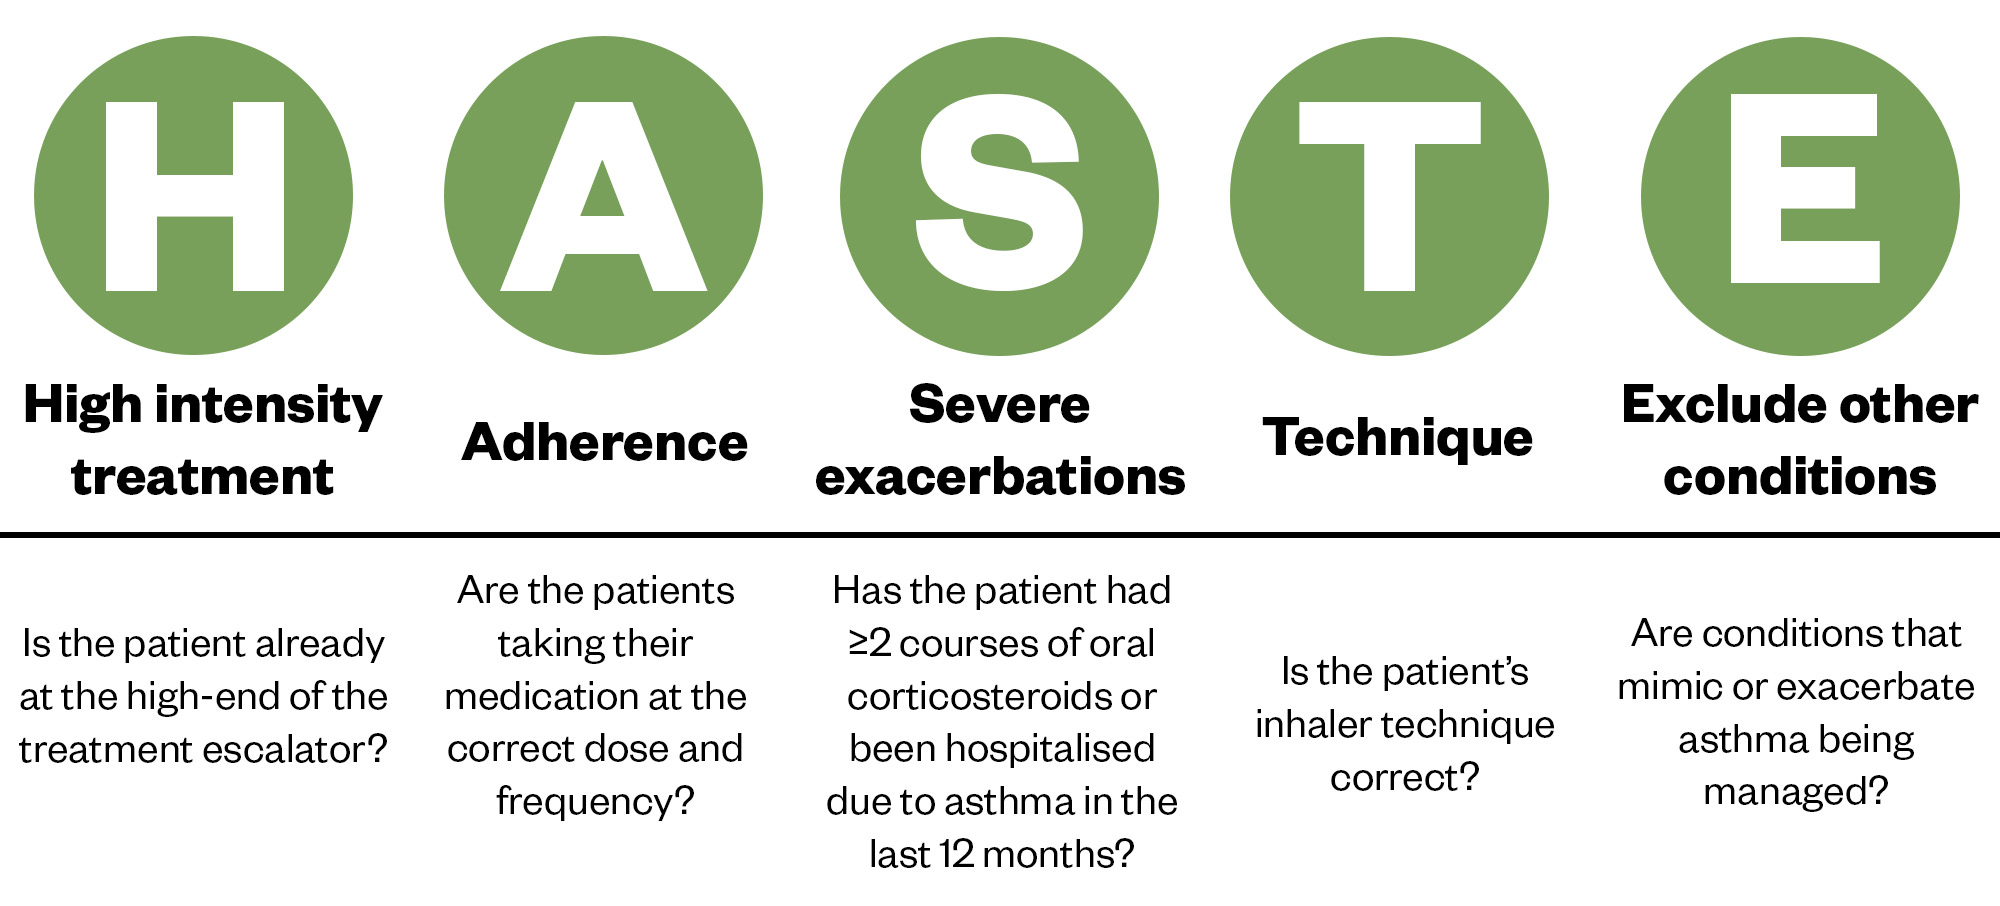 Diagram showing the haste acronym tool: "H for high intensity treatment, A for adherence, S for severe exacerbations, T for technique and E for Exclude other conditions.